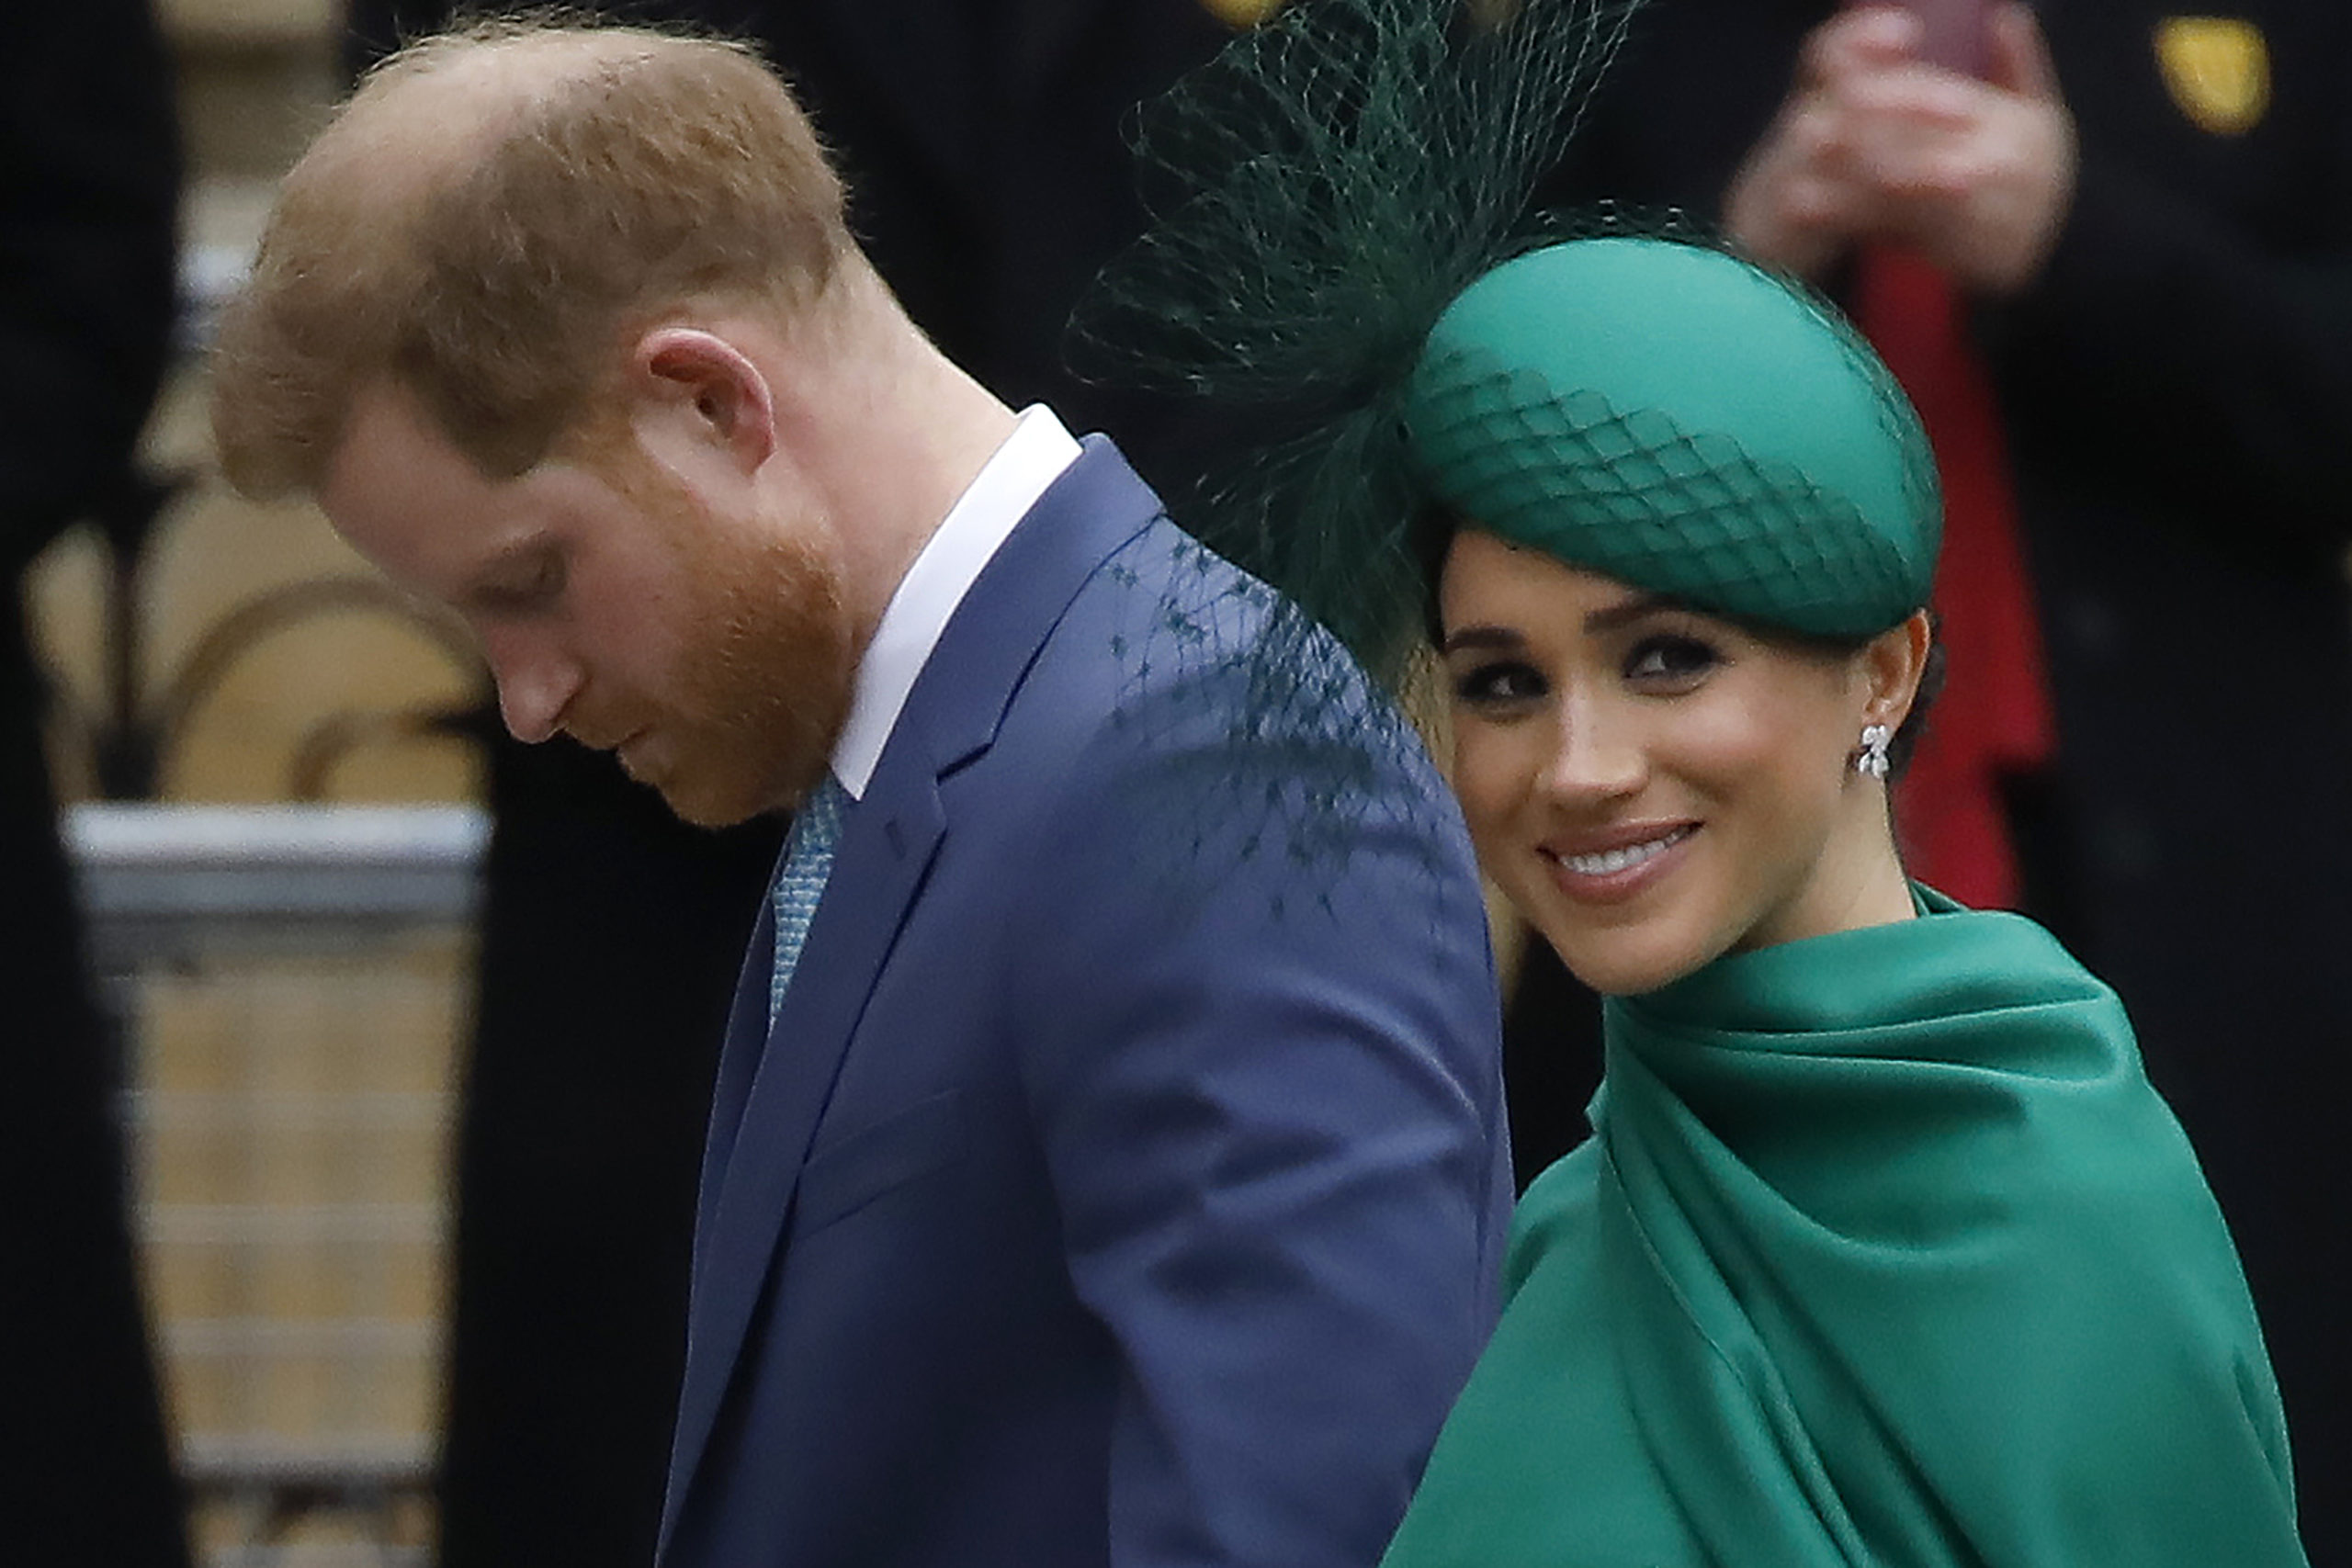 Britain's Prince Harry, Duke of Sussex, (L) and Meghan, Duchess of Sussex arrive to attend the annual Commonwealth Service at Westminster Abbey in London on March 09, 2020. (TOLGA AKMEN/AFP via Getty Images)